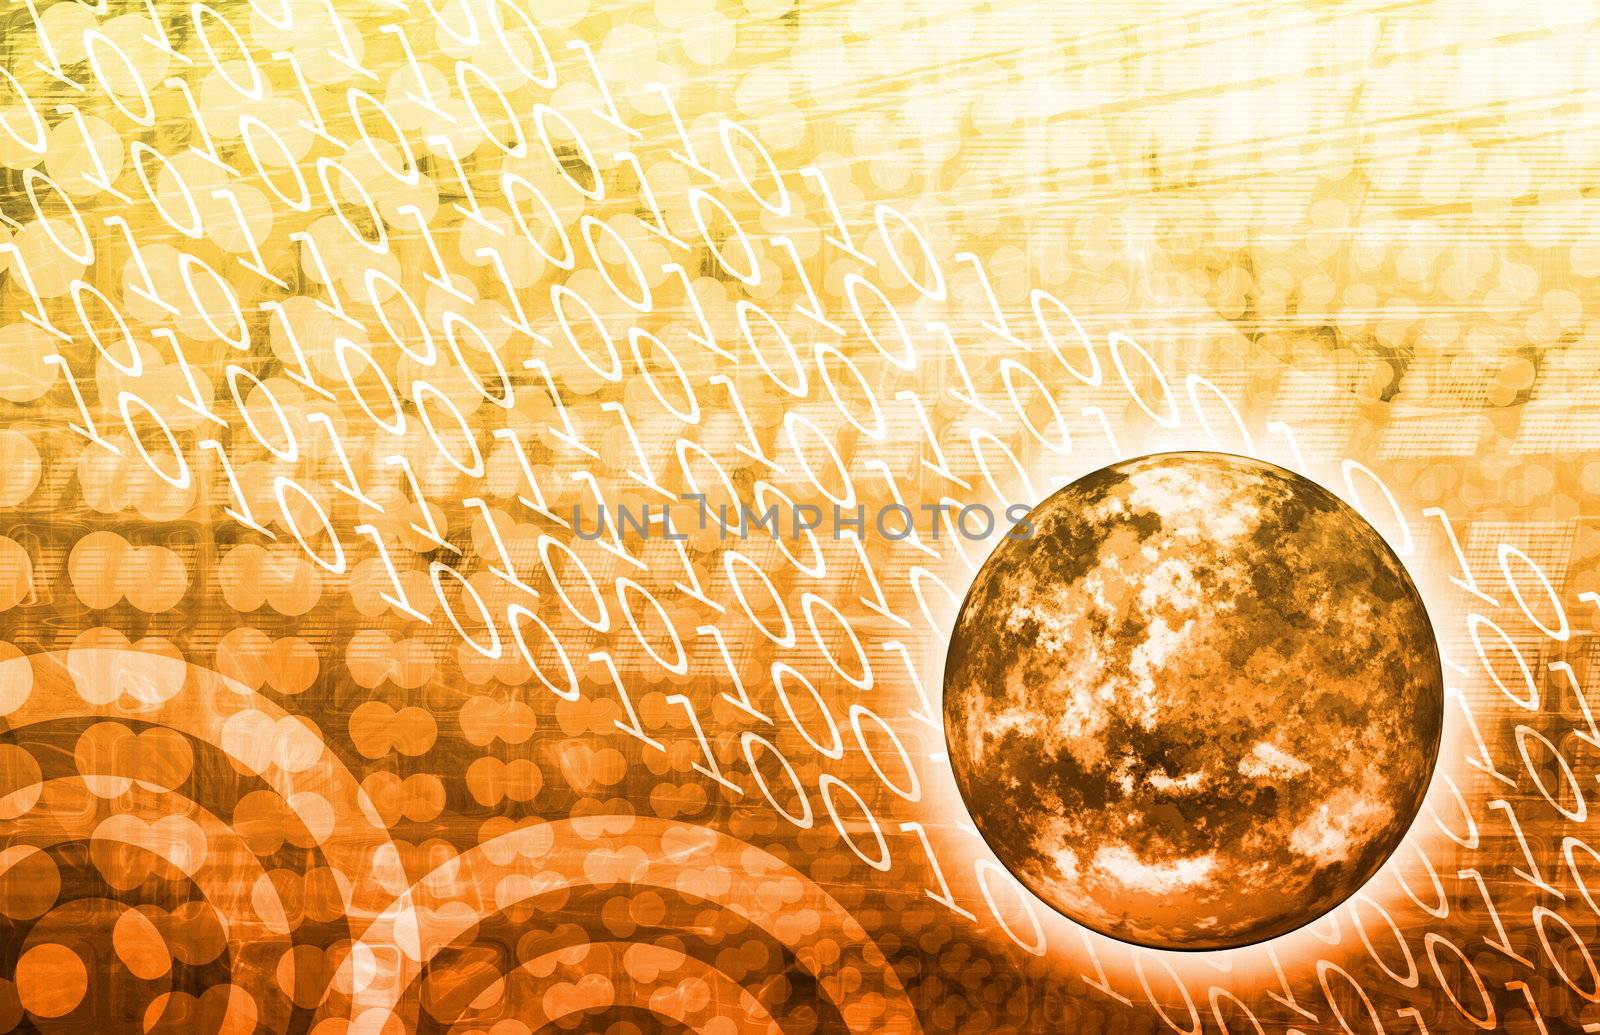 A Global Business Abstract Background Art Texture